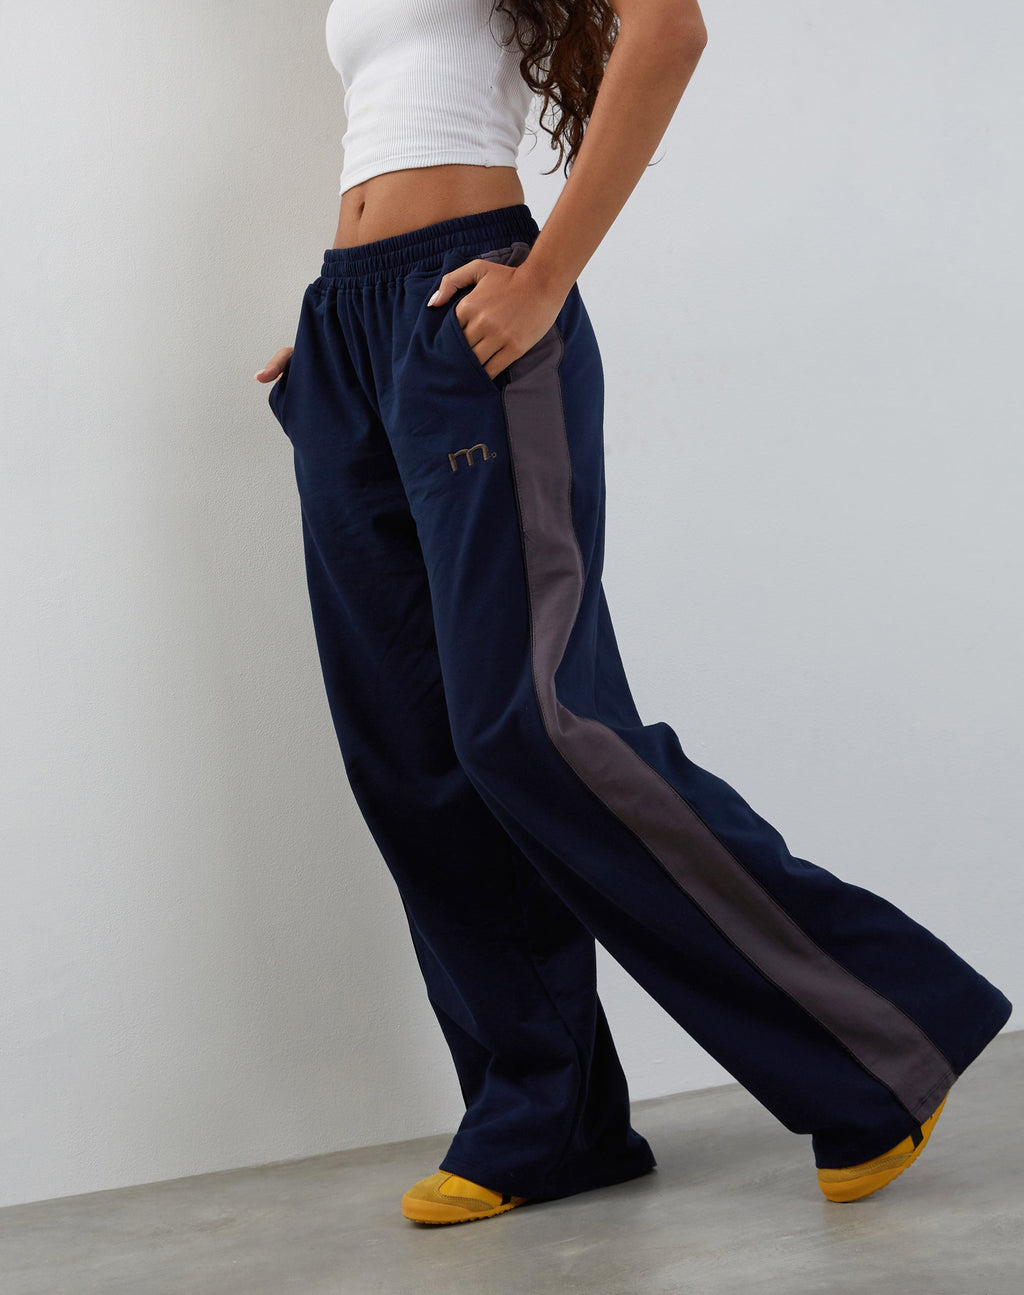 Bedion Oversized Jogger in Navy with M Embroidery